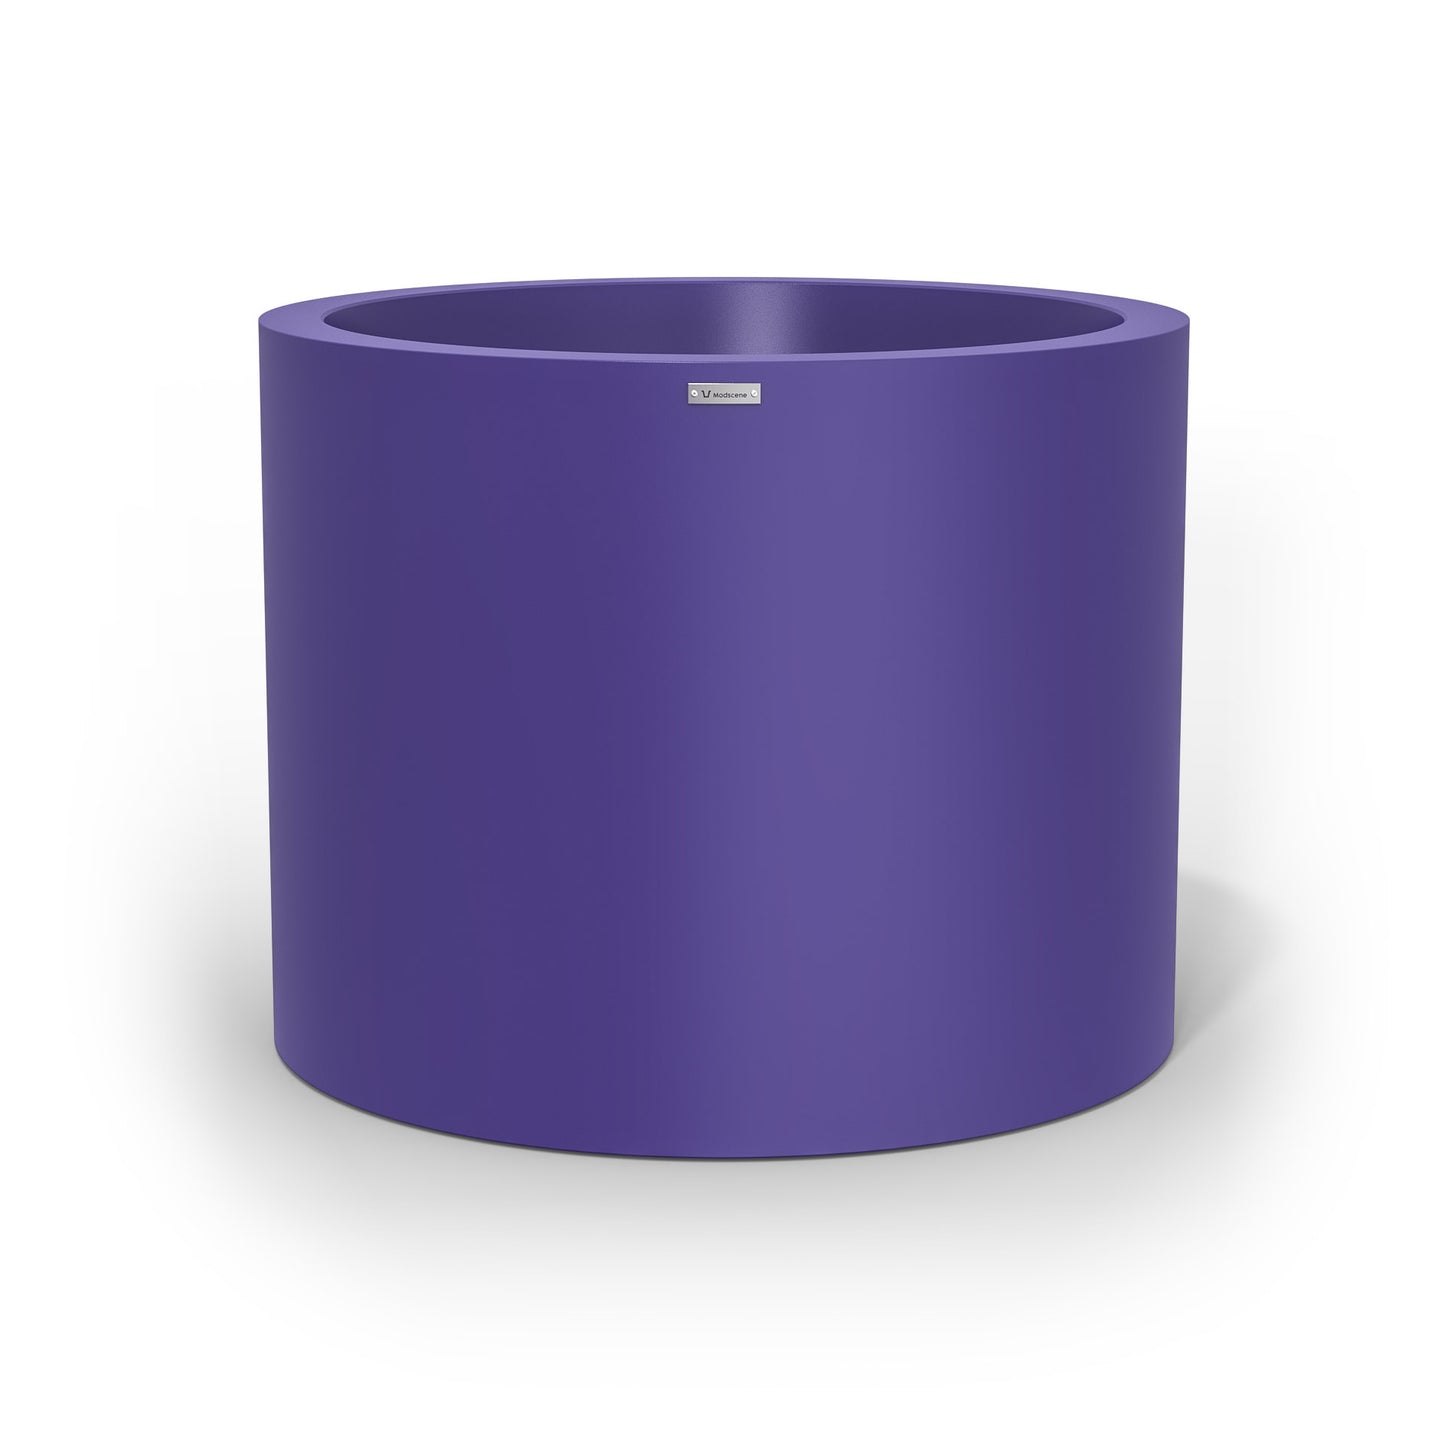 An extra large cylinder pot planter in purple. Made by Modscene New Zealand.